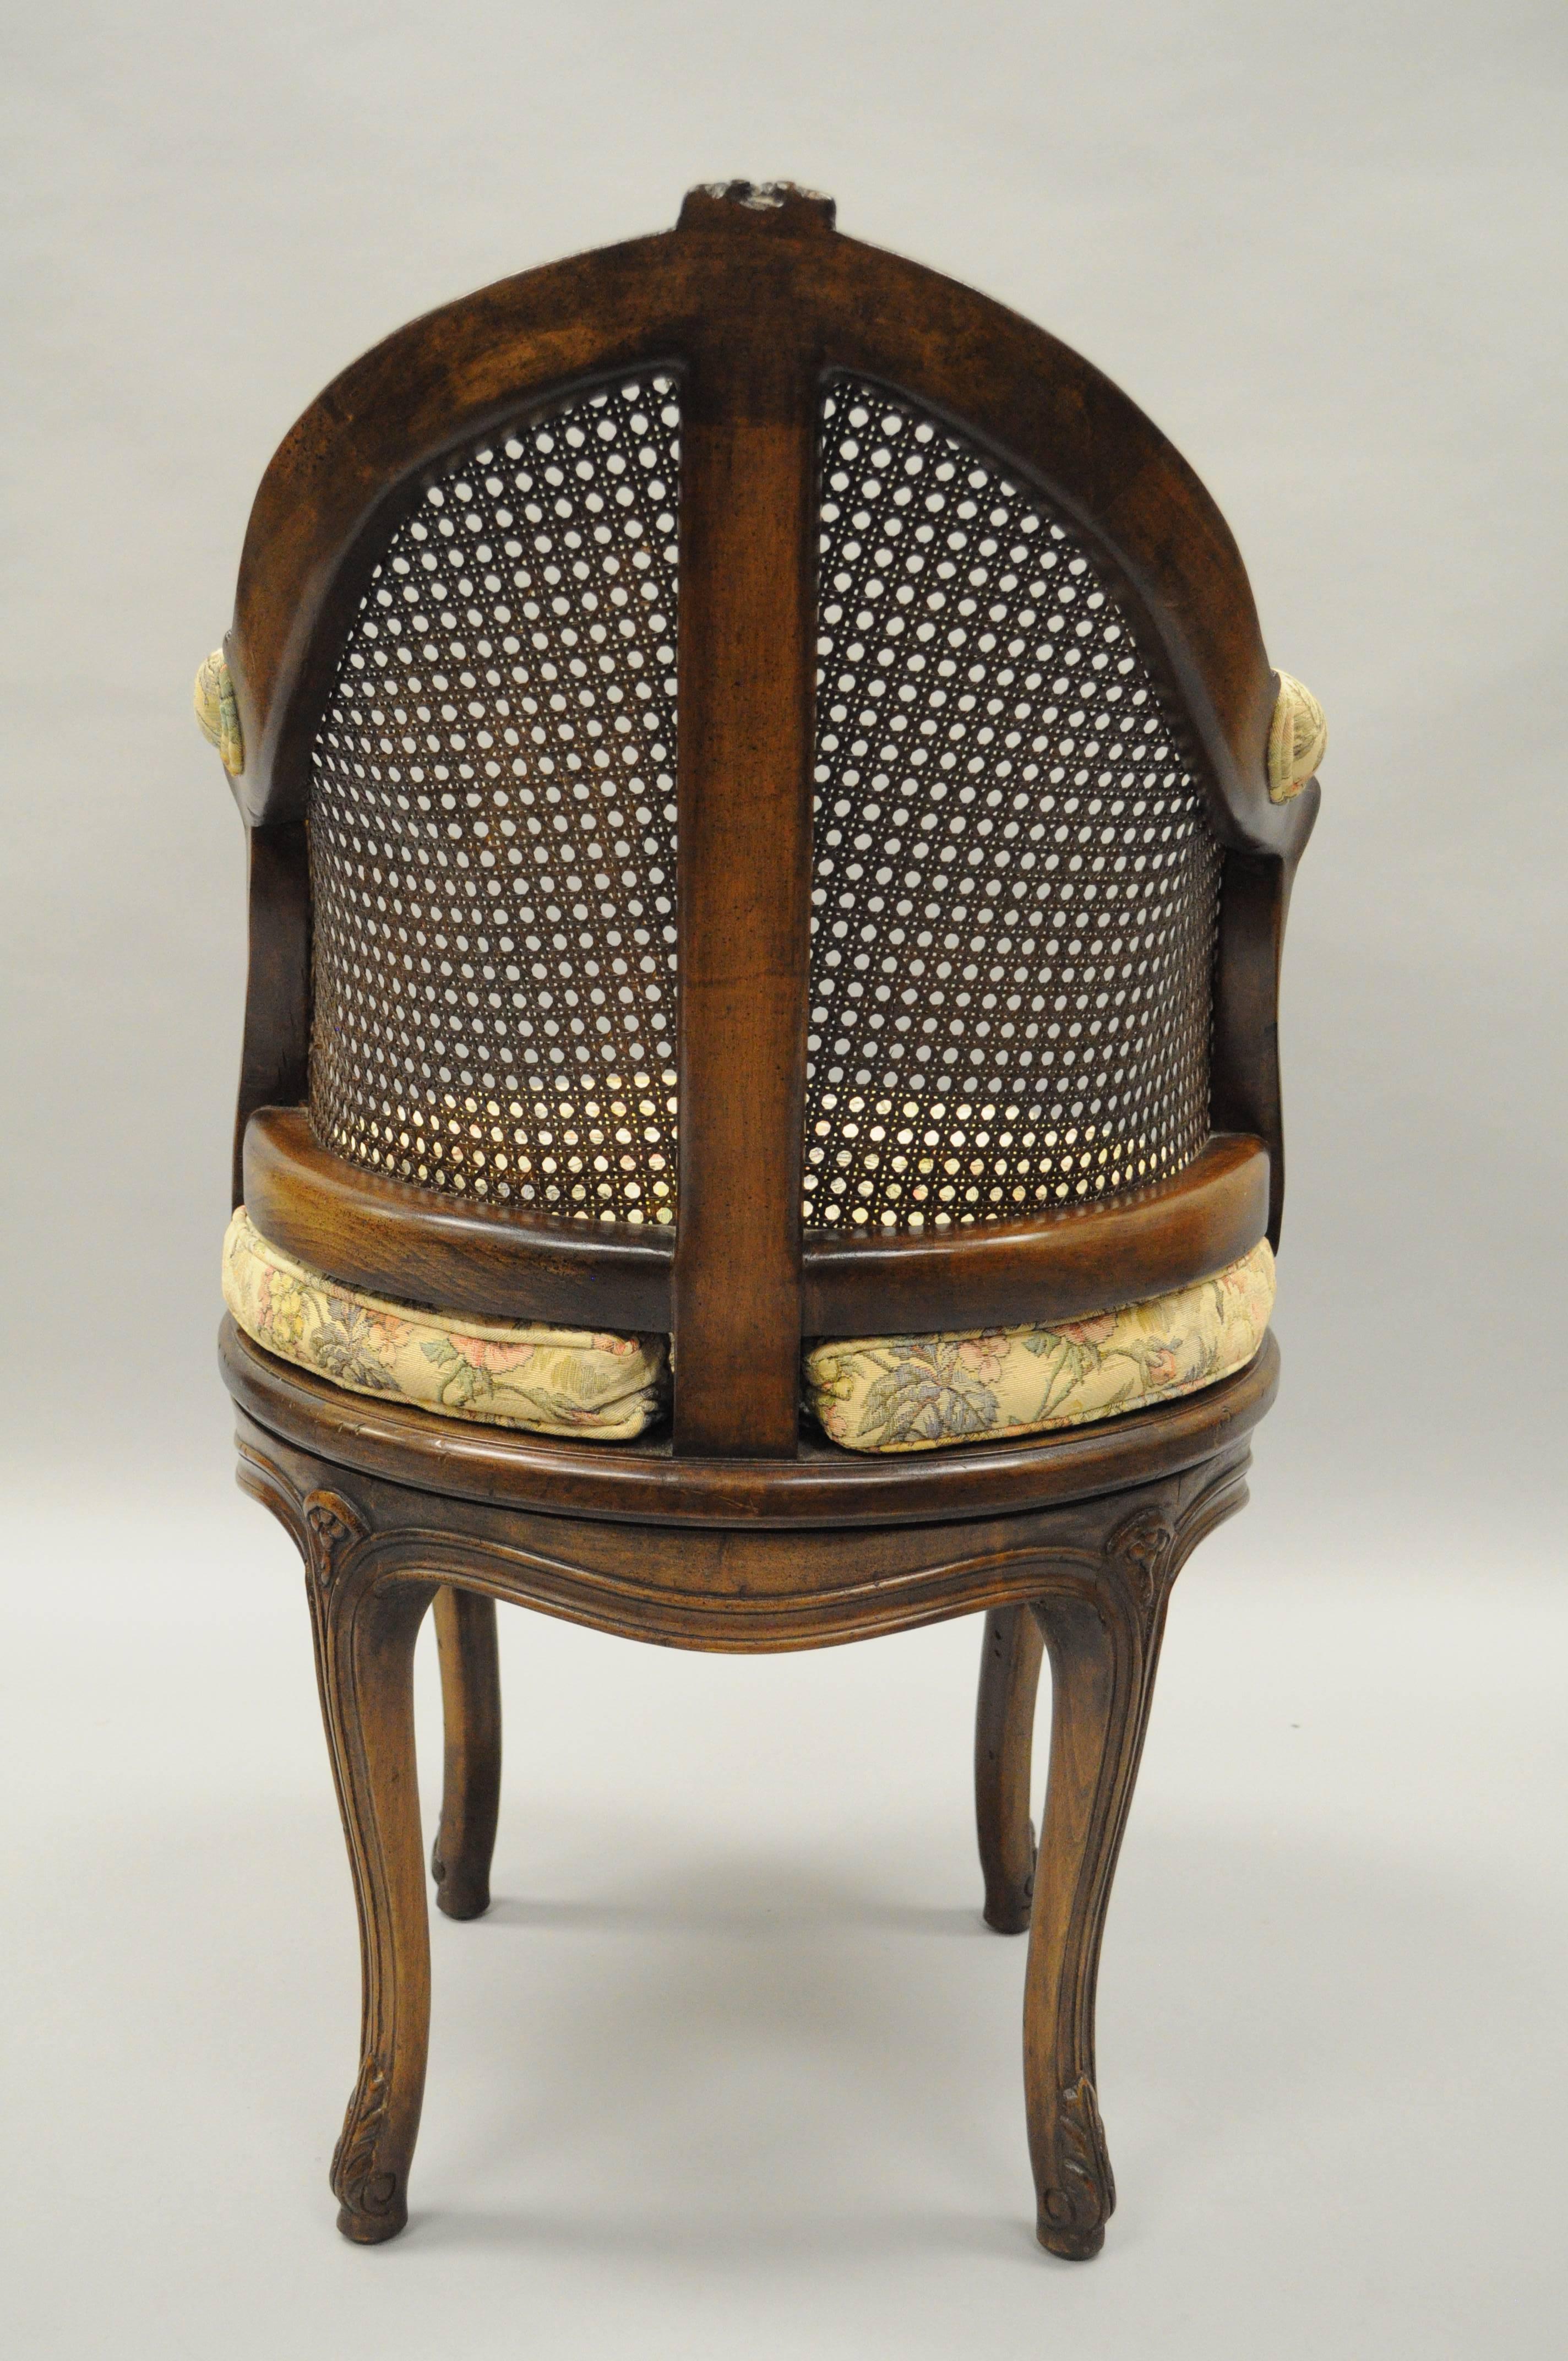 Upholstery French Country Louis XV Style Swivel Vanity Chair Cane Back Boudoir Seat Walnut